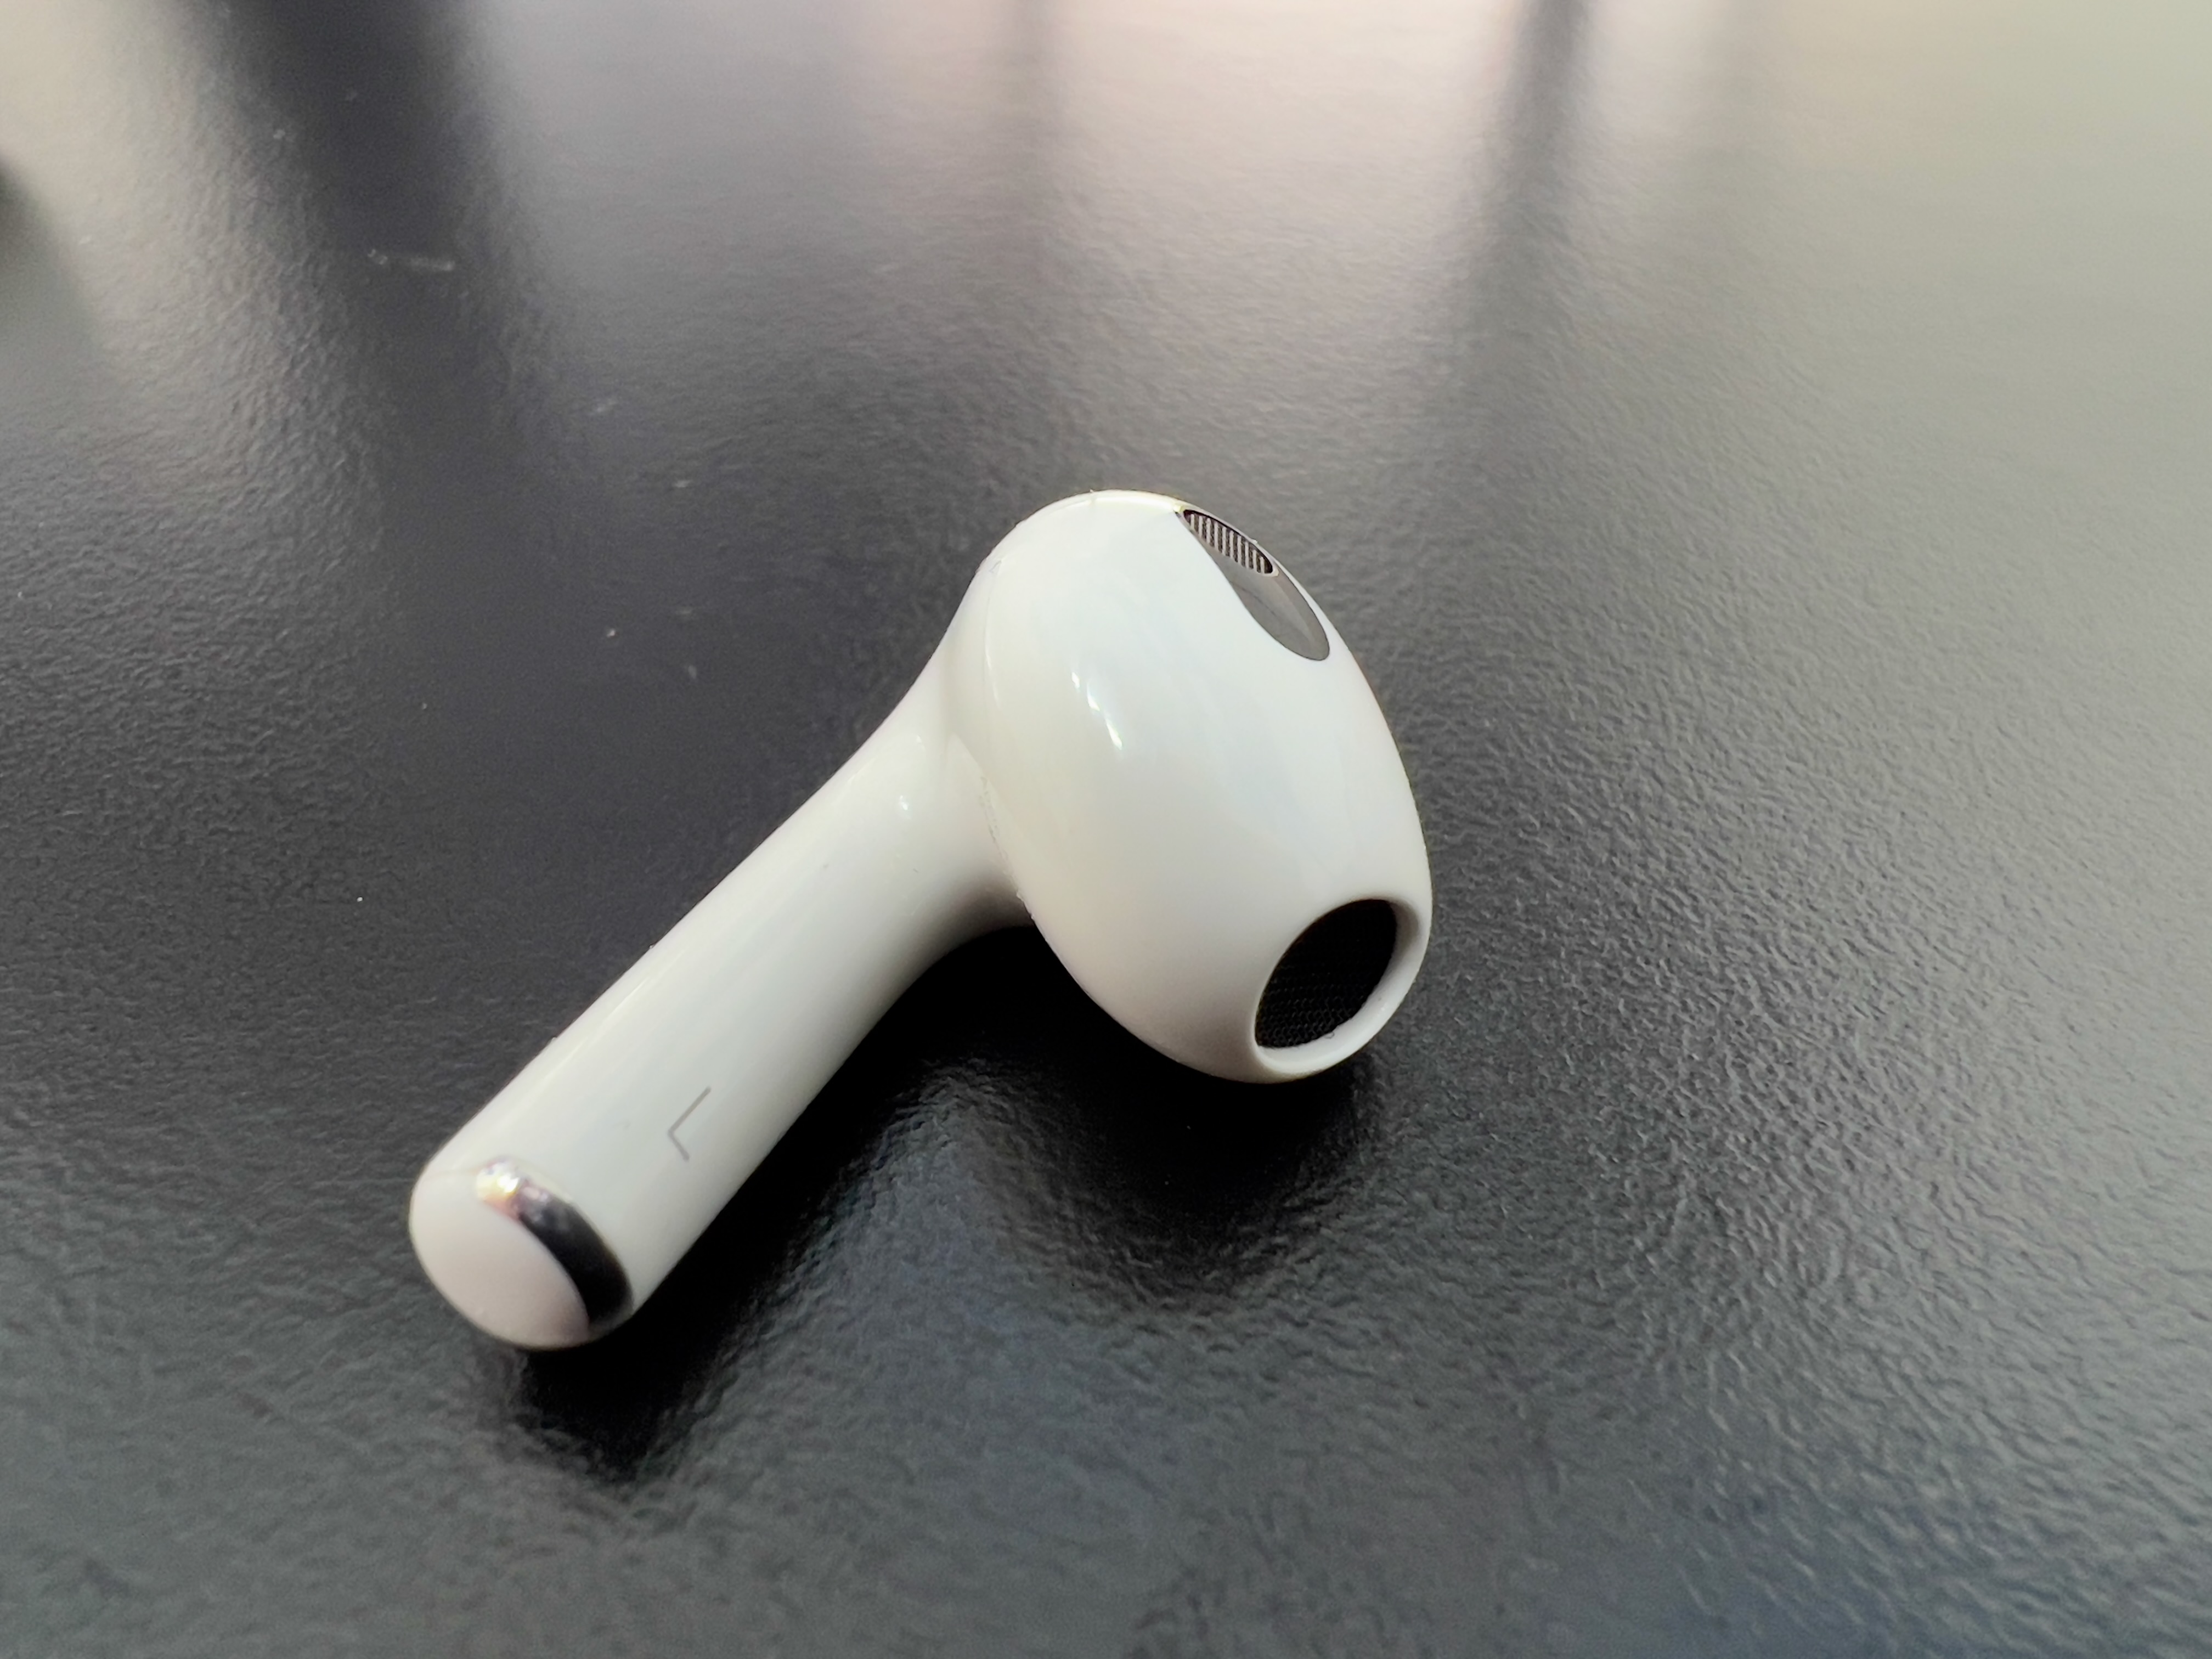 Apple AirPods (3rd Generation) review: Improvements in all the